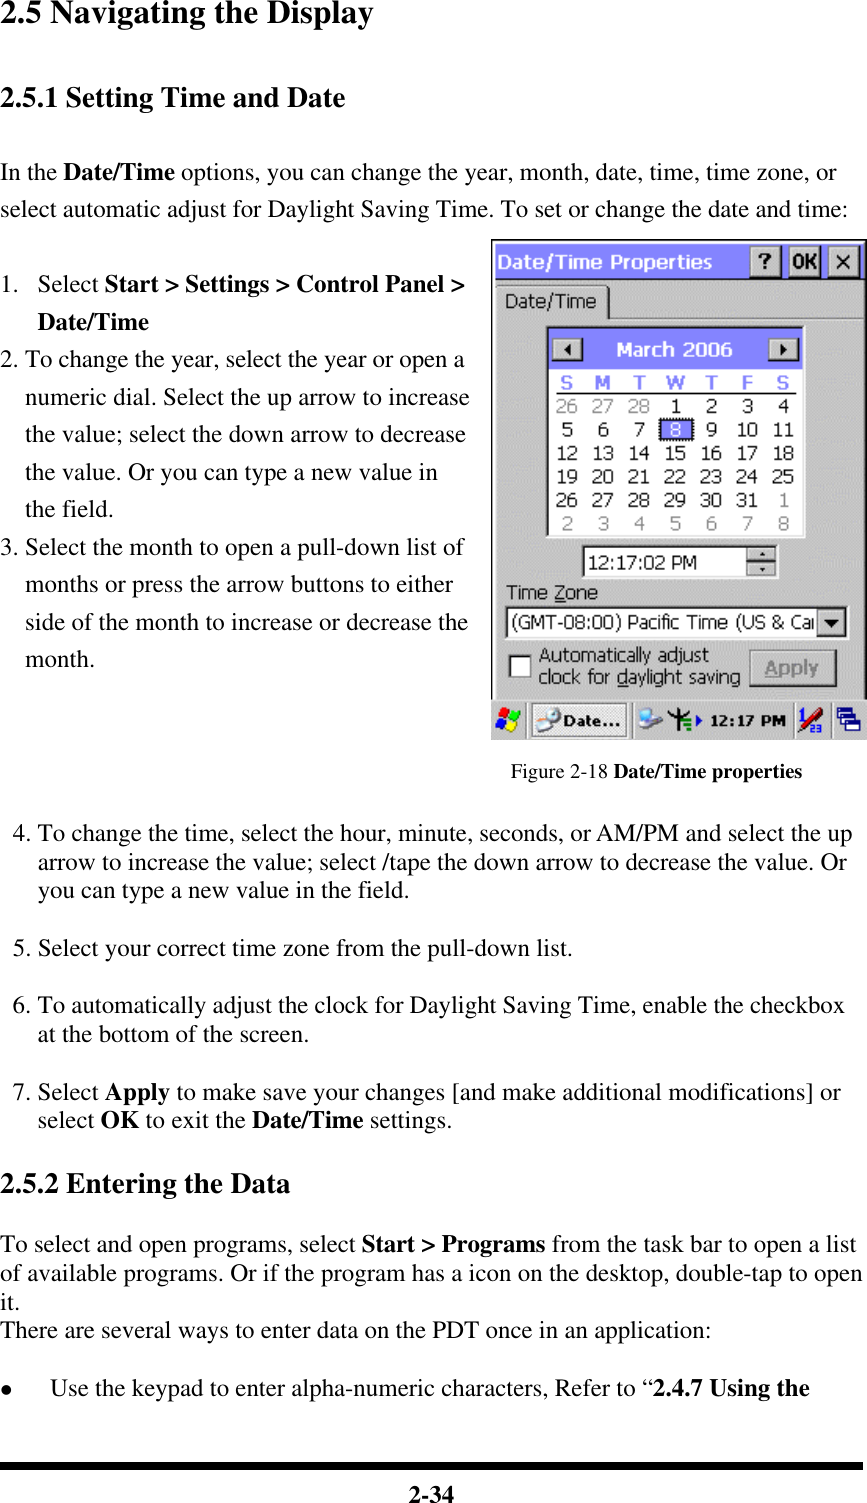  2-34 2.5 Navigating the Display  2.5.1 Setting Time and Date  In the Date/Time options, you can change the year, month, date, time, time zone, or select automatic adjust for Daylight Saving Time. To set or change the date and time:  1.  Select Start &gt; Settings &gt; Control Panel &gt; Date/Time 2. To change the year, select the year or open a numeric dial. Select the up arrow to increase the value; select the down arrow to decrease the value. Or you can type a new value in the field. 3. Select the month to open a pull-down list of months or press the arrow buttons to either side of the month to increase or decrease the month.   Figure 2-18 Date/Time properties   4. To change the time, select the hour, minute, seconds, or AM/PM and select the up arrow to increase the value; select /tape the down arrow to decrease the value. Or you can type a new value in the field.   5. Select your correct time zone from the pull-down list.   6. To automatically adjust the clock for Daylight Saving Time, enable the checkbox at the bottom of the screen.   7. Select Apply to make save your changes [and make additional modifications] or select OK to exit the Date/Time settings.  2.5.2 Entering the Data  To select and open programs, select Start &gt; Programs from the task bar to open a list of available programs. Or if the program has a icon on the desktop, double-tap to open it. There are several ways to enter data on the PDT once in an application:  l Use the keypad to enter alpha-numeric characters, Refer to “2.4.7 Using the 